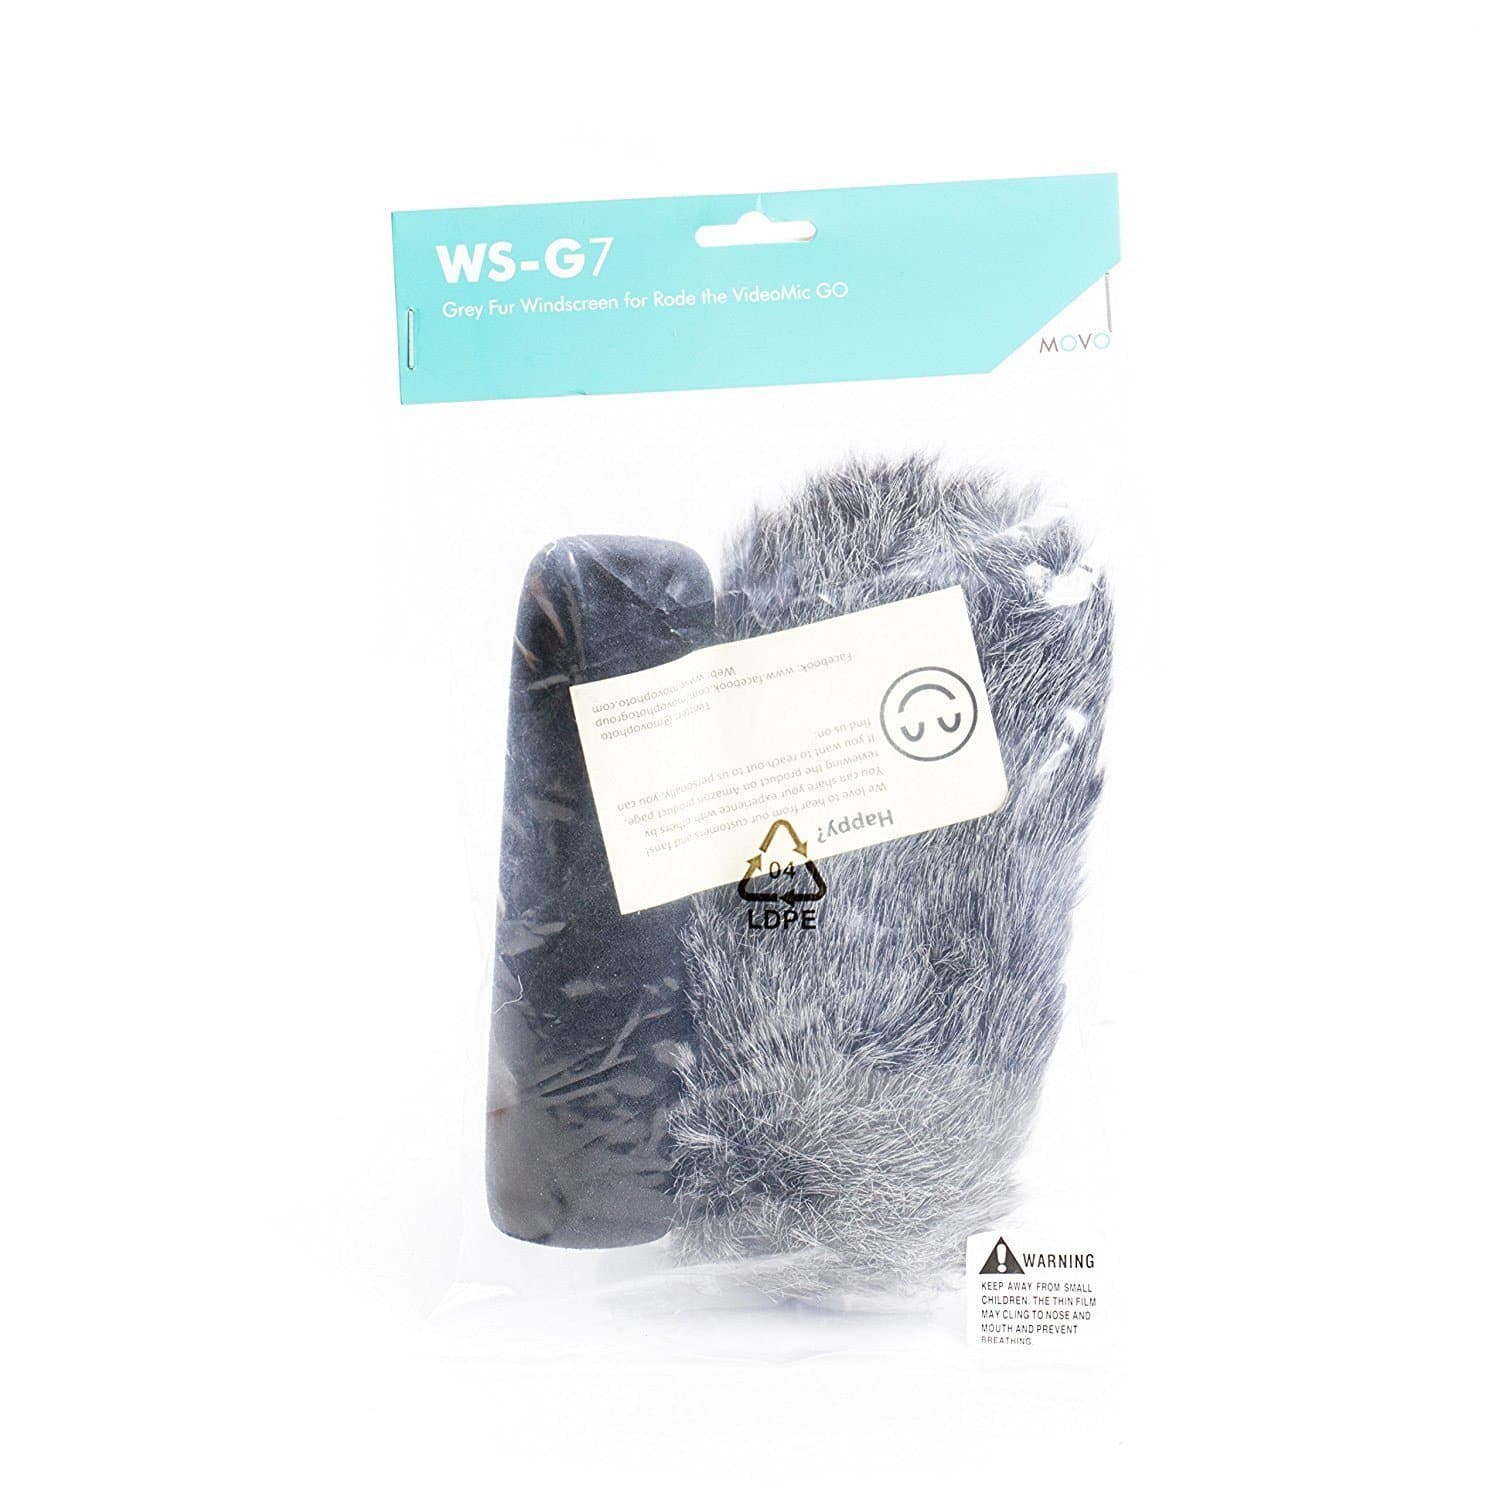 Indoor & Outdoor Wind Muffs | Rode VideoMic Go | WS-G7 | Movo - Movo